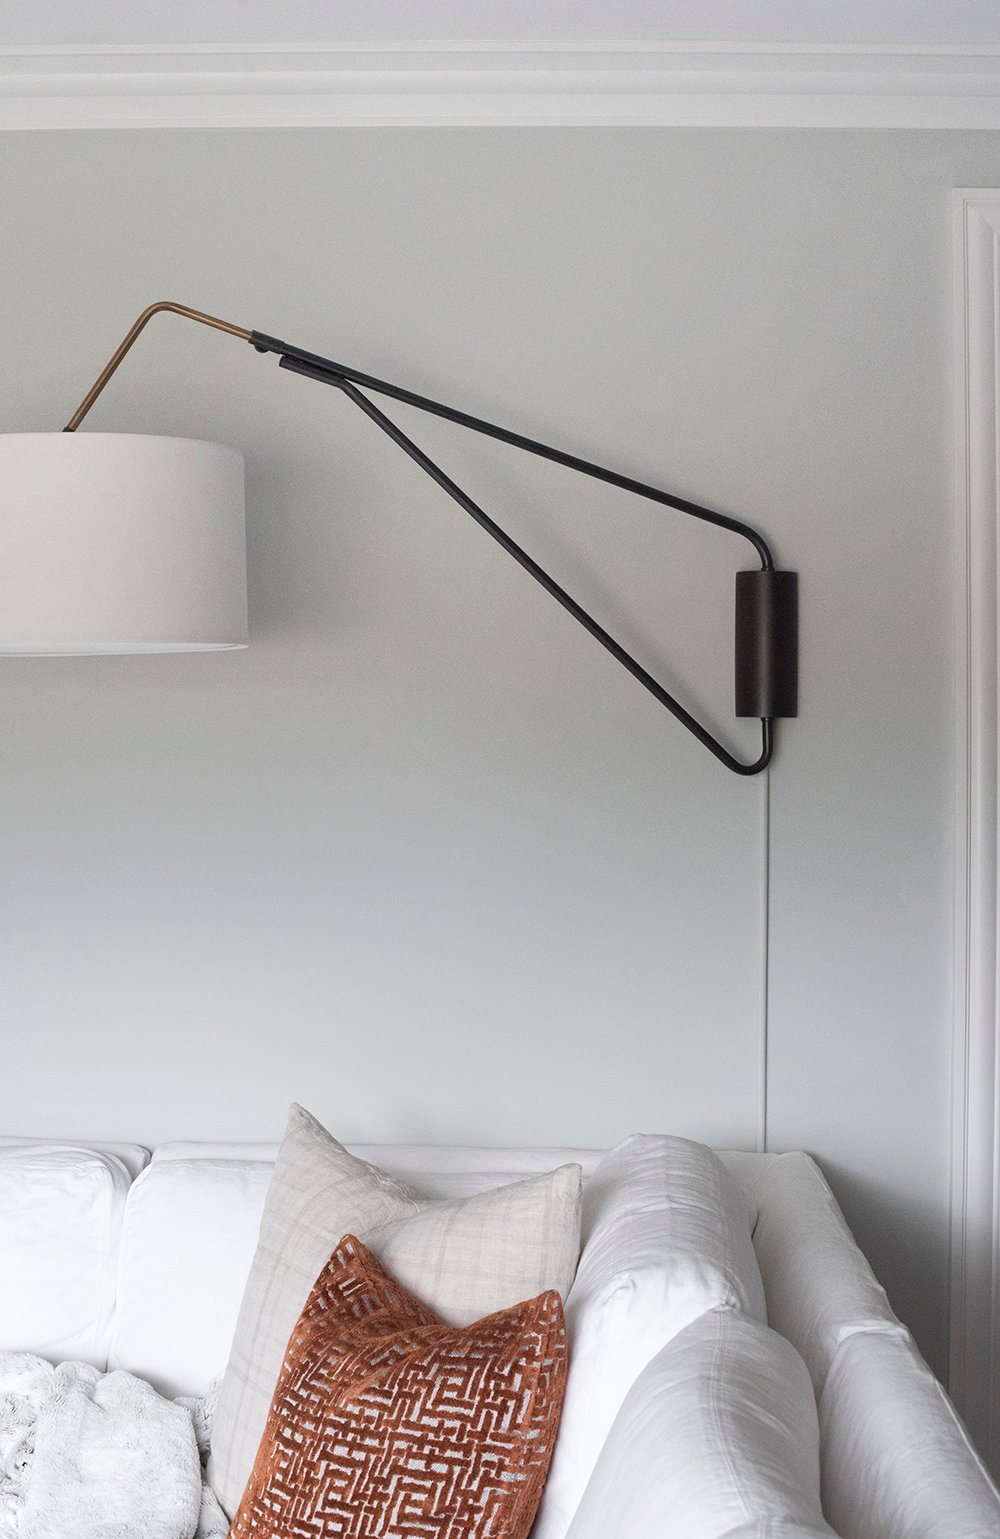 How to Hide Light Fixture Cords - roomfortuesday.com